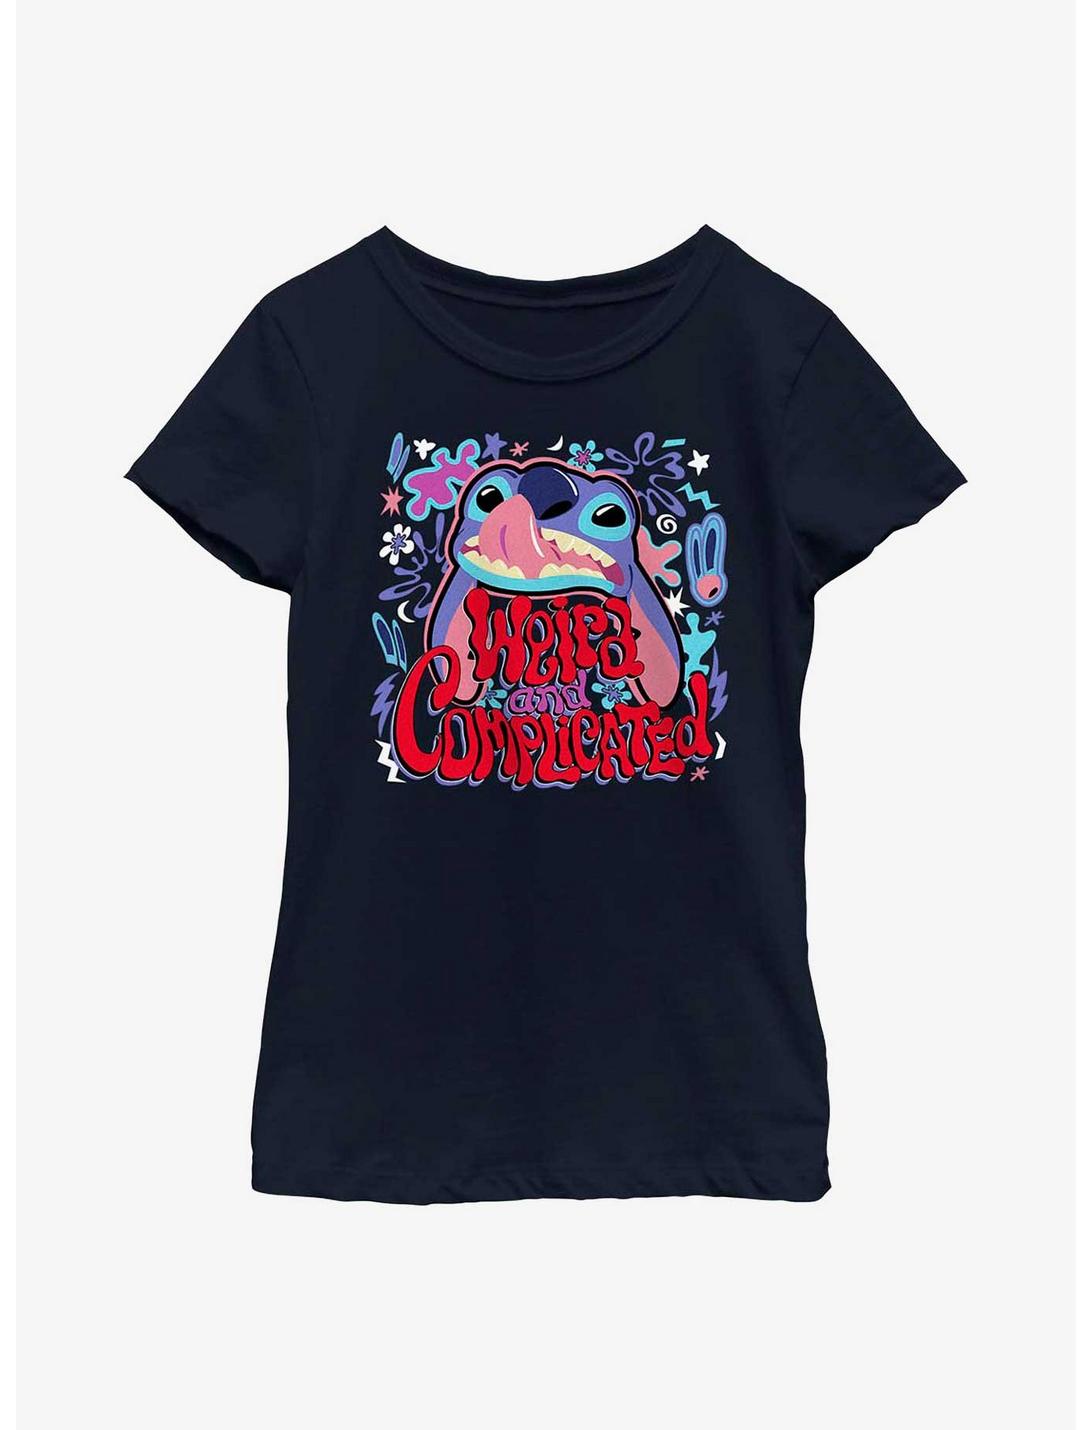 Disney Lilo & Stitch Weird And Complicated Youth Girls T-Shirt, NAVY, hi-res